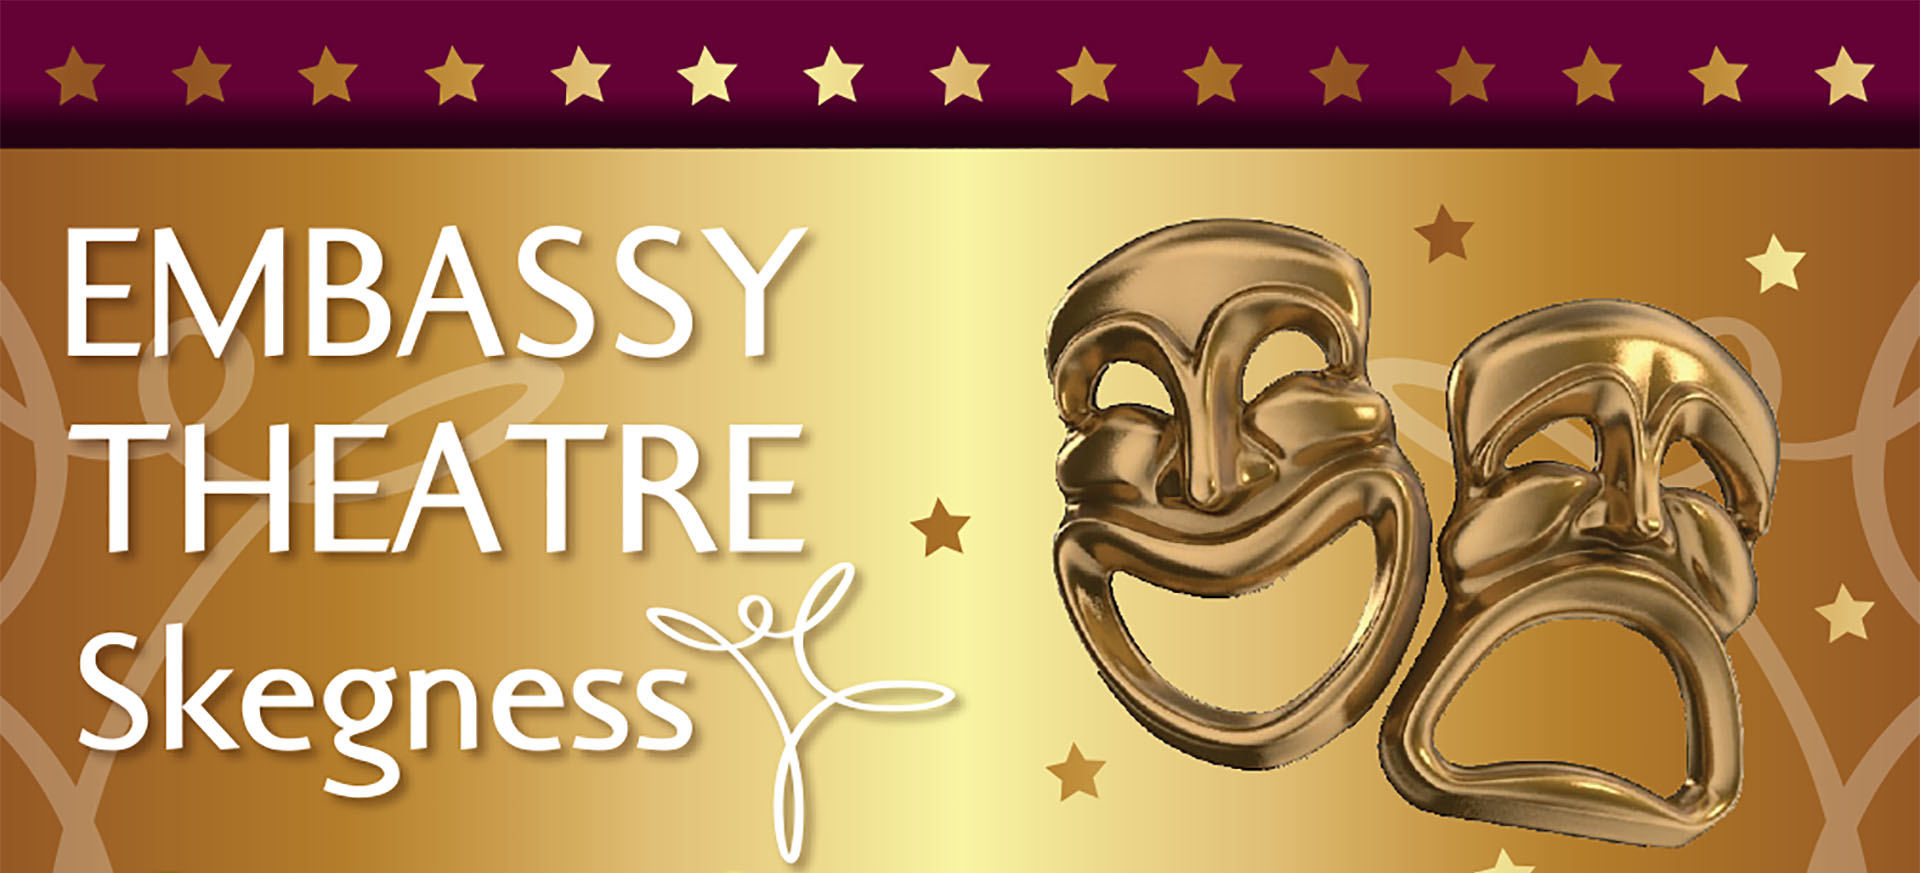 Embassy Theatre Skegness Gift Card